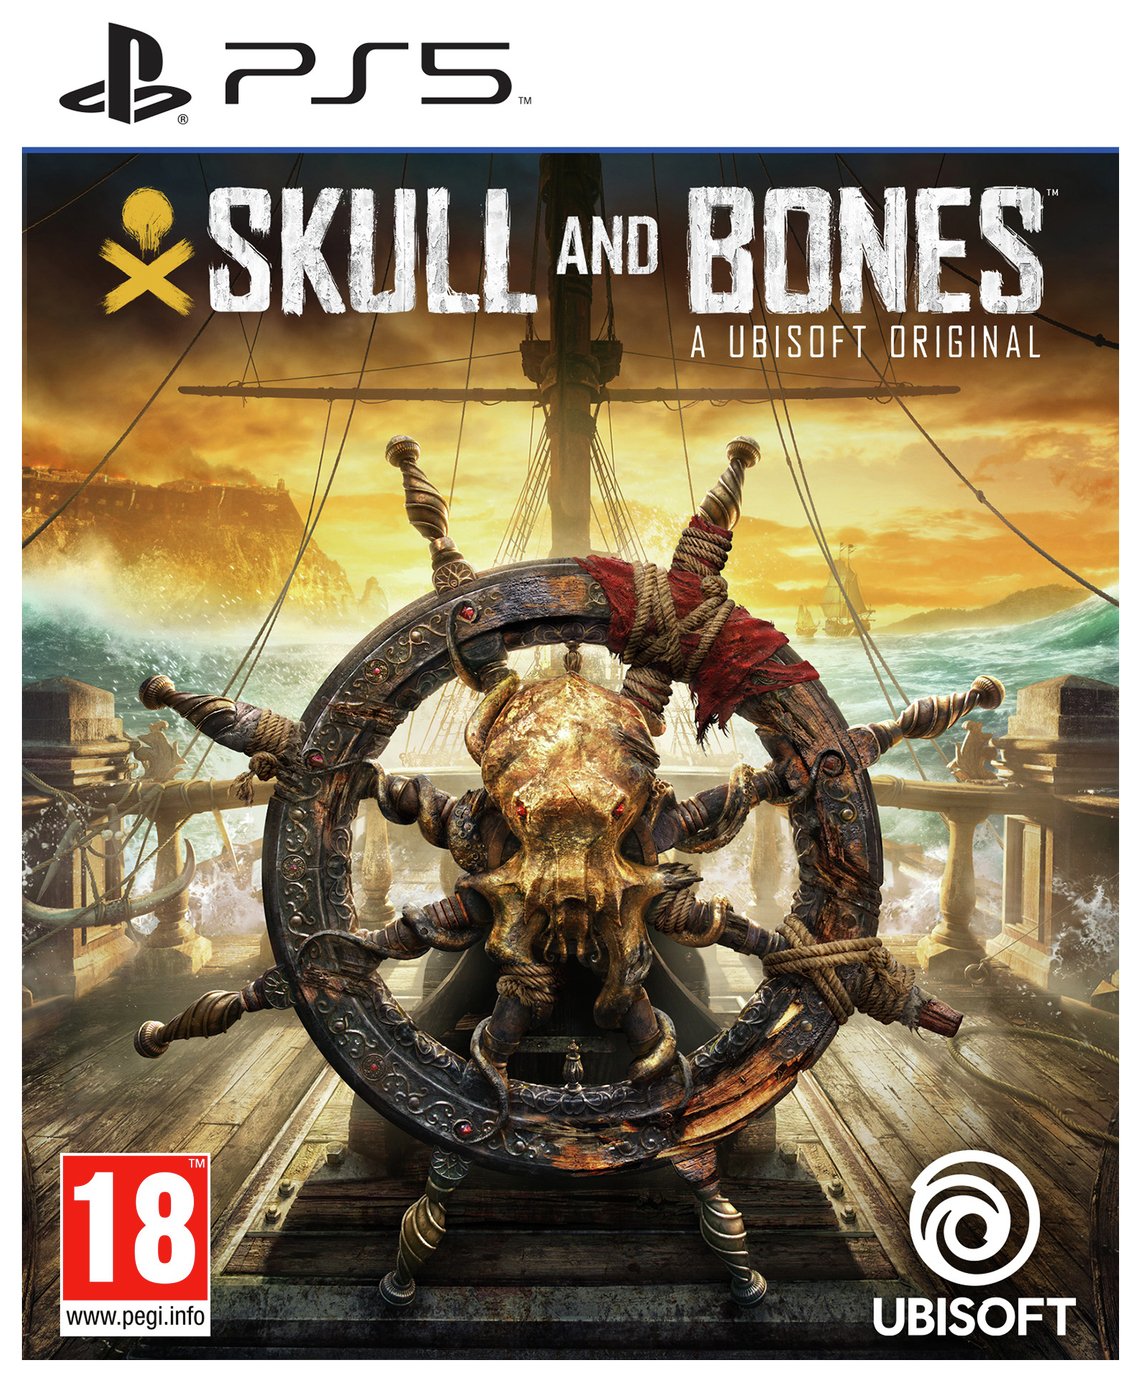 Skull and Bones: New gameplay trailer, official release date, pre-order,  and more